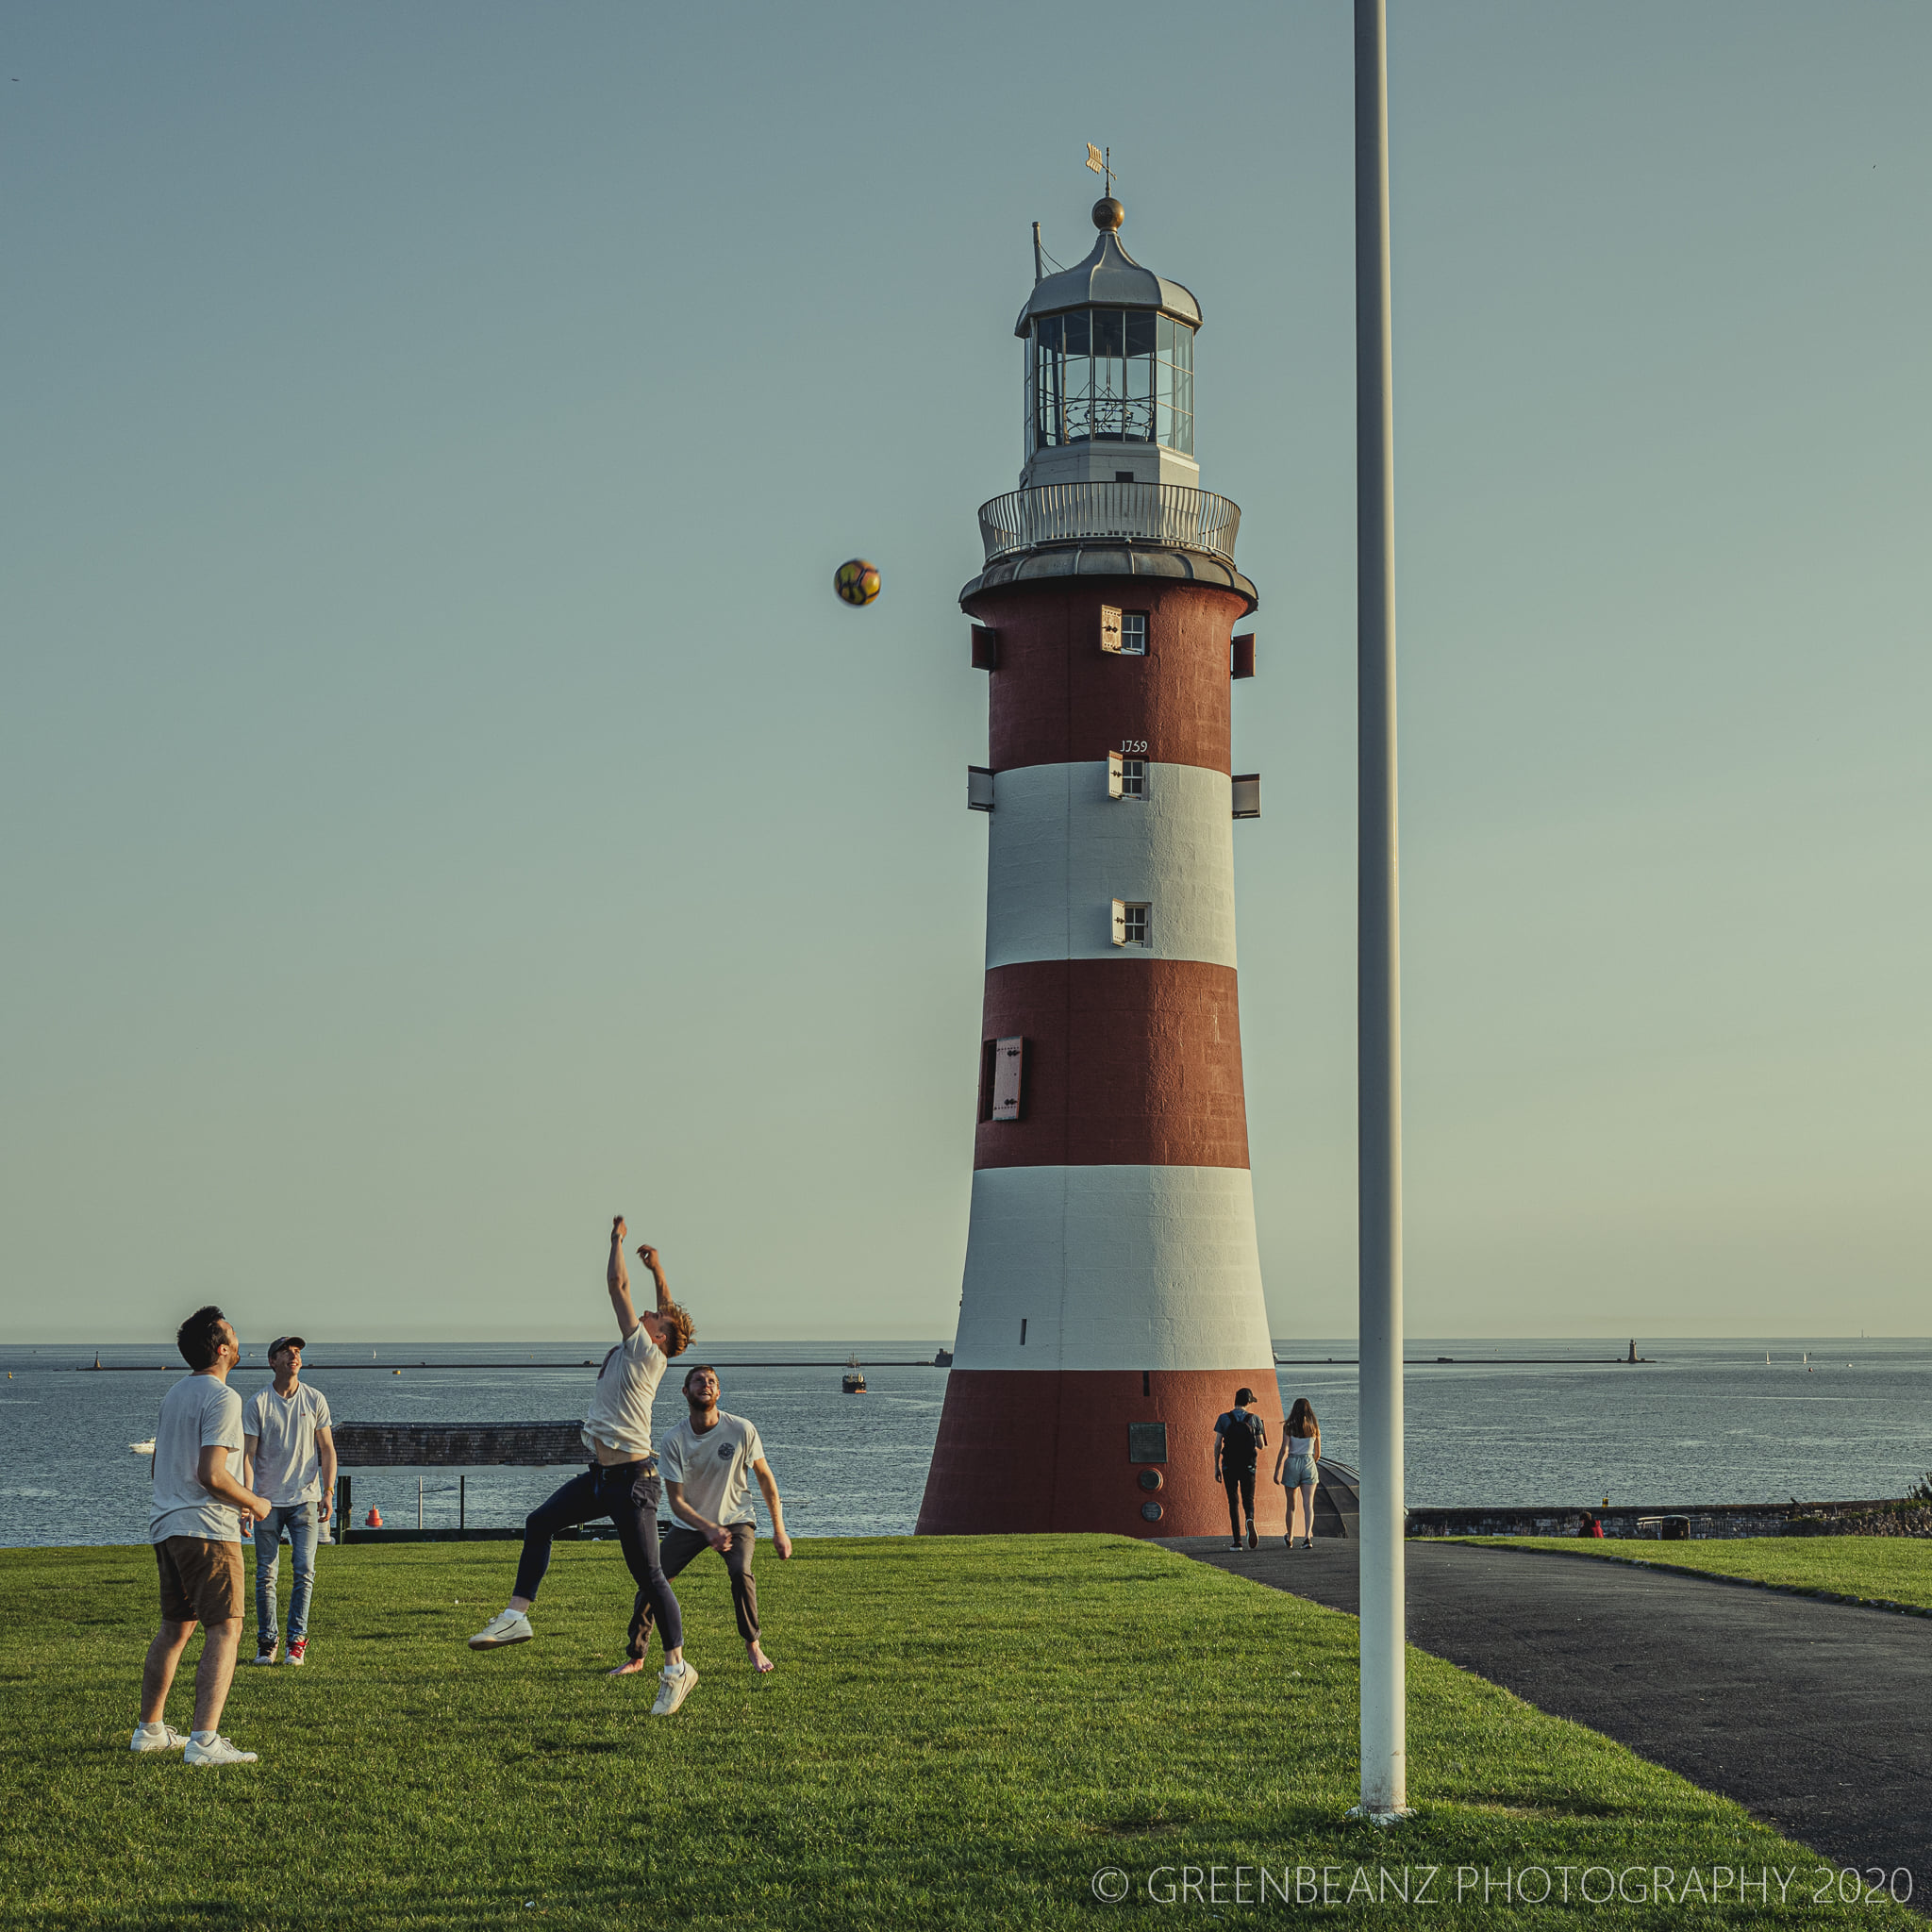 Ball Games in front of Smeaton's Tower on Plymouth Hoe 